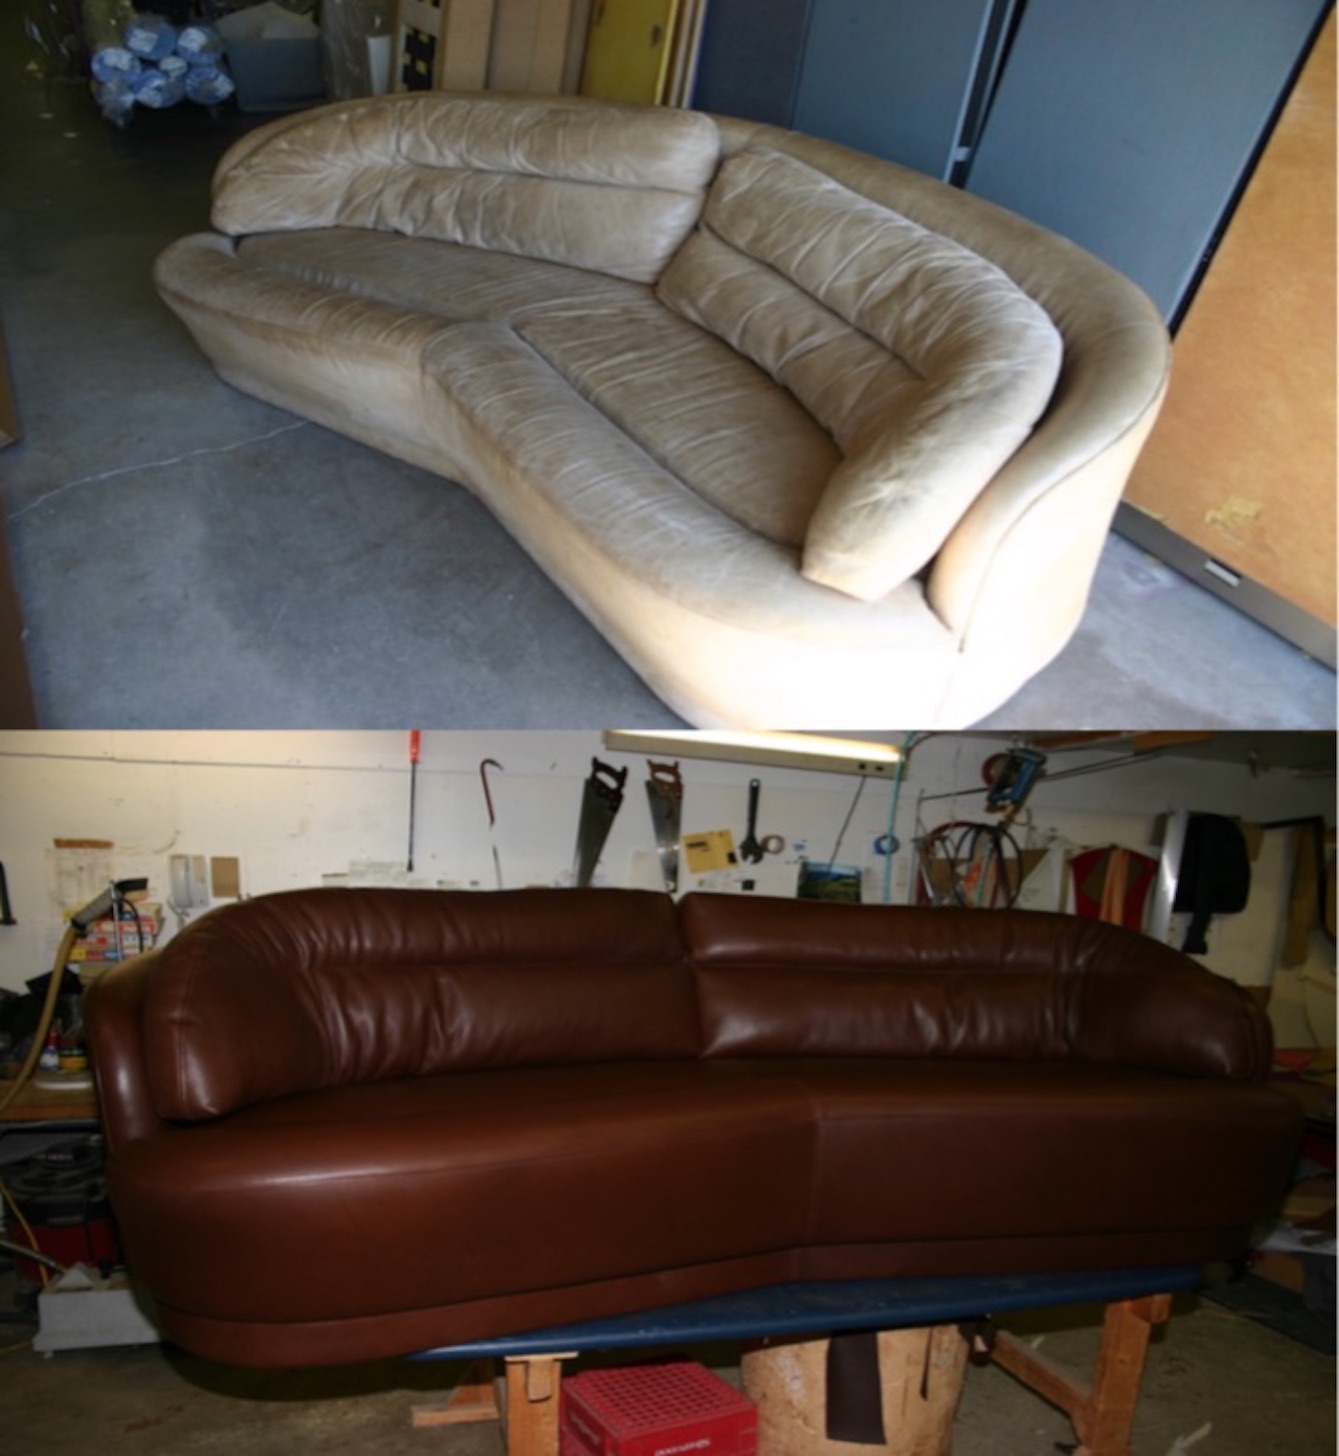 Before and after comparison of an old and later refurbished couch.